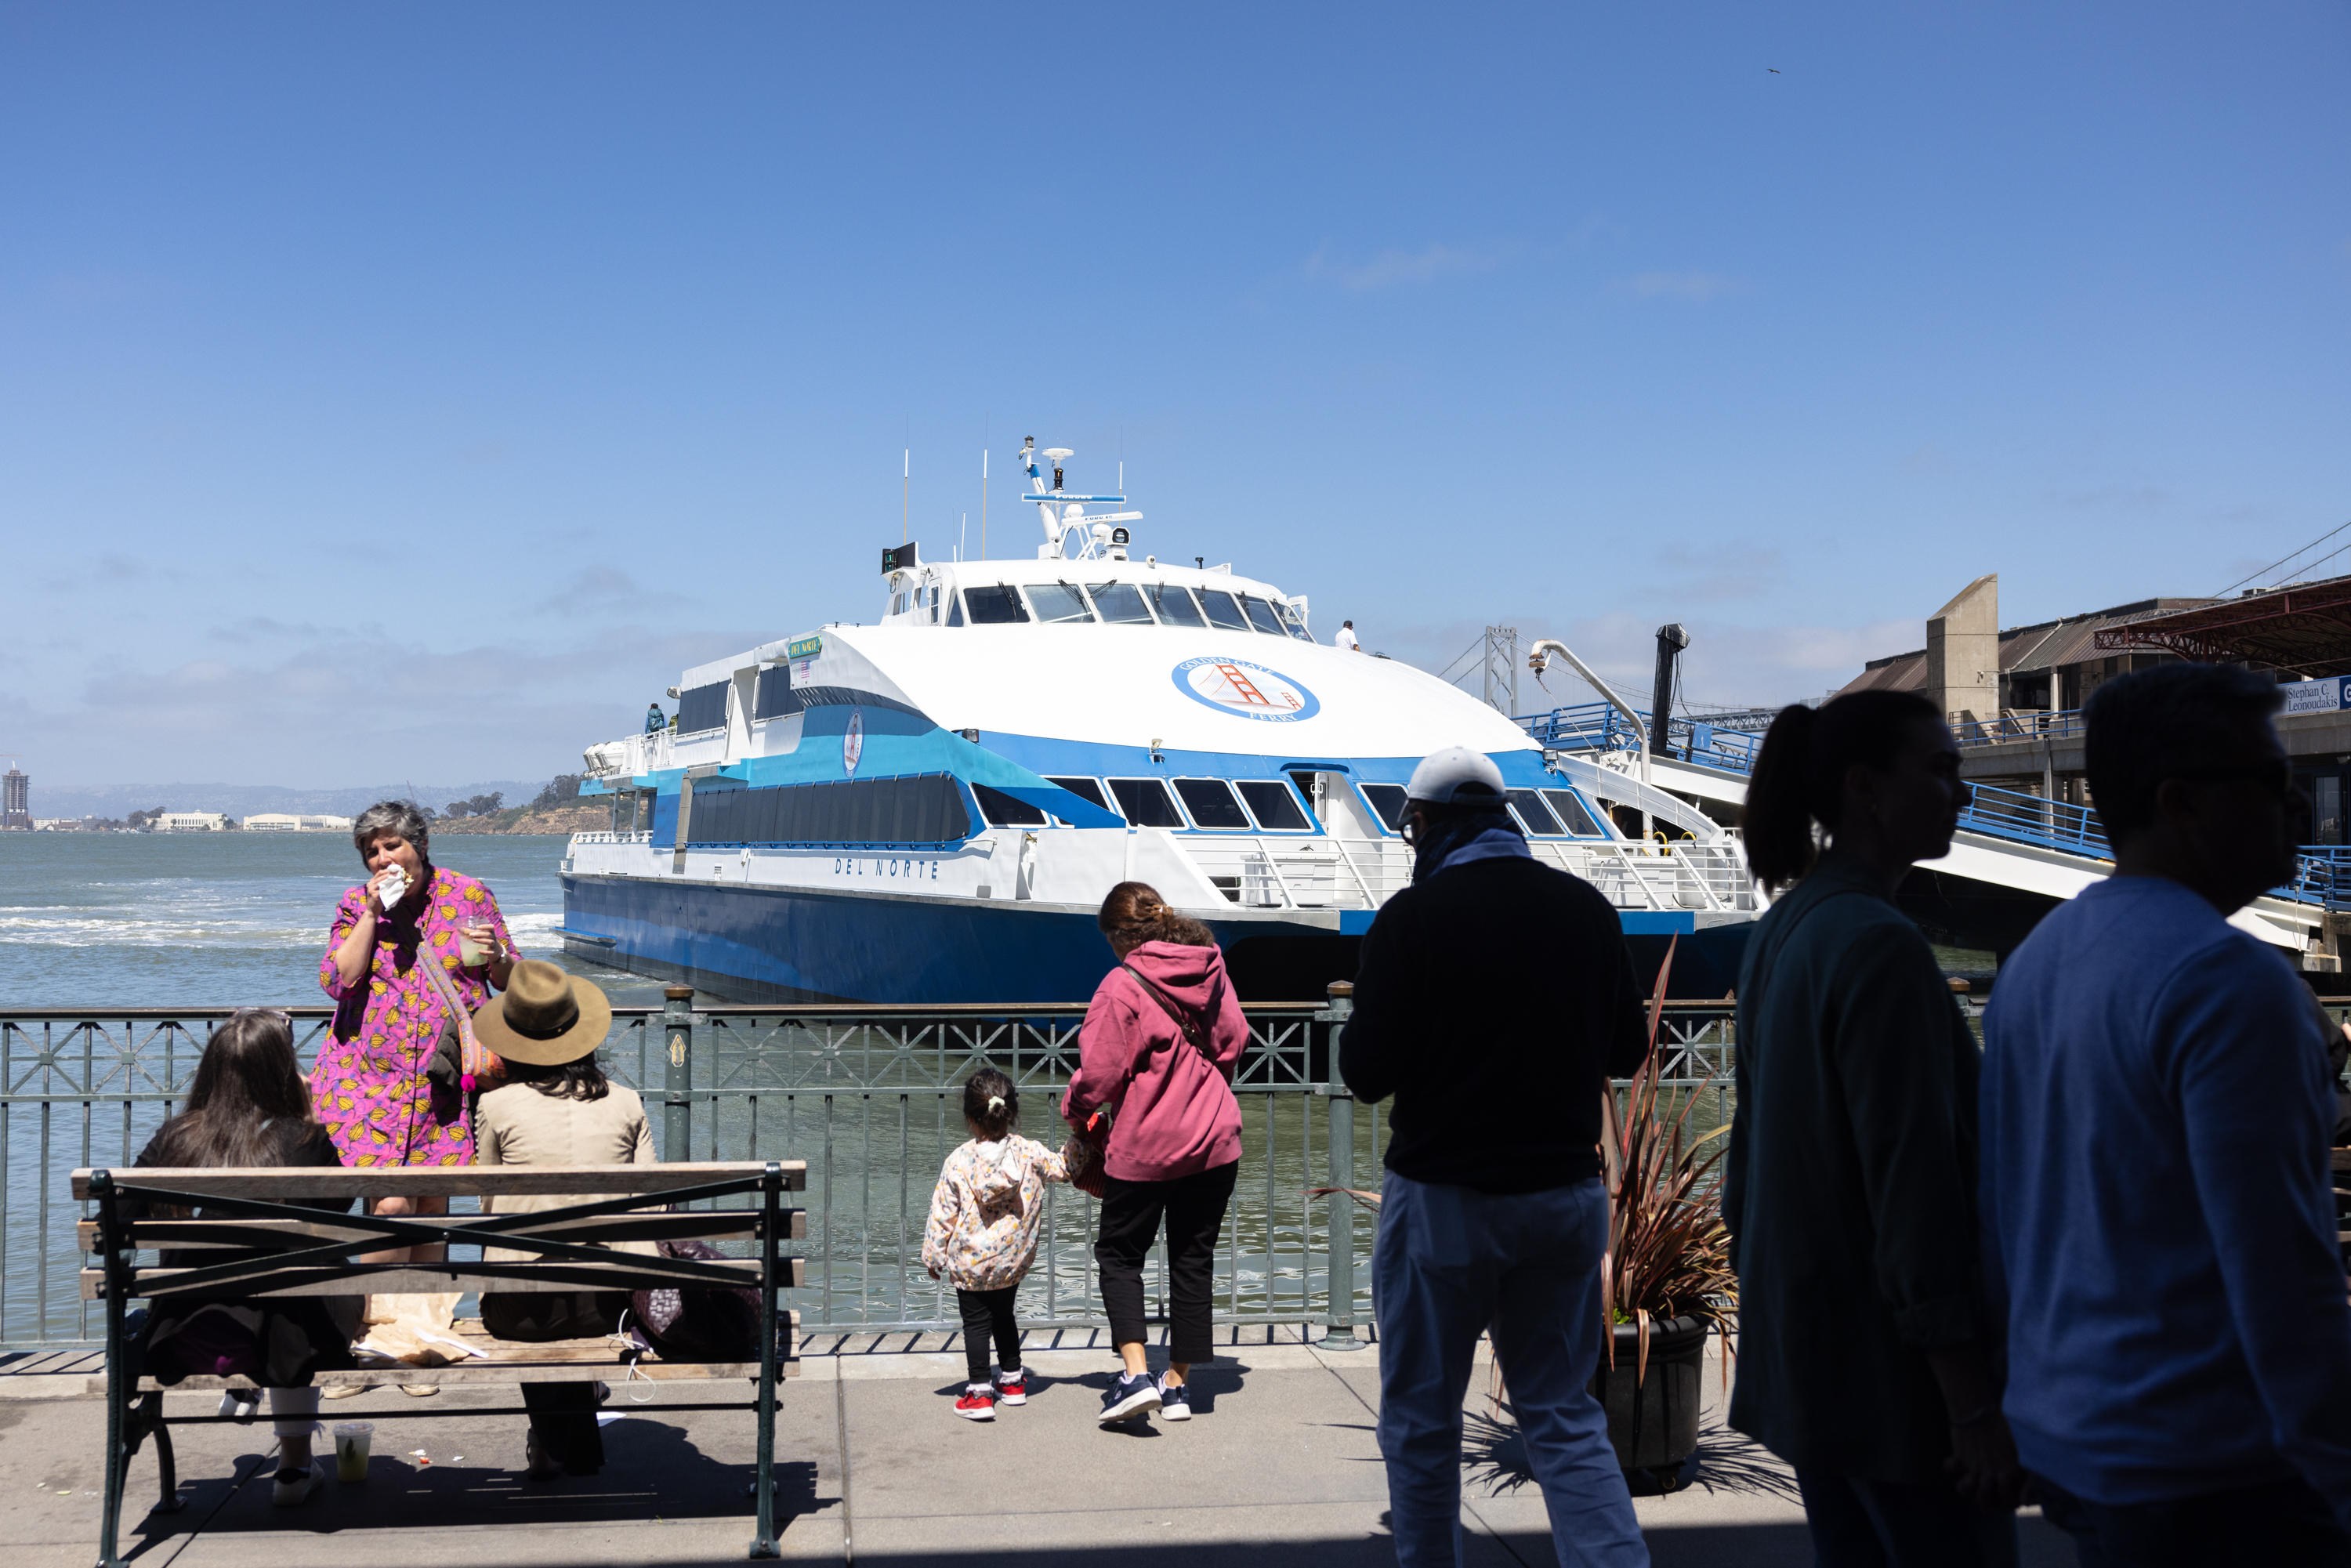 People on a dock observe a ferry boat on the water.